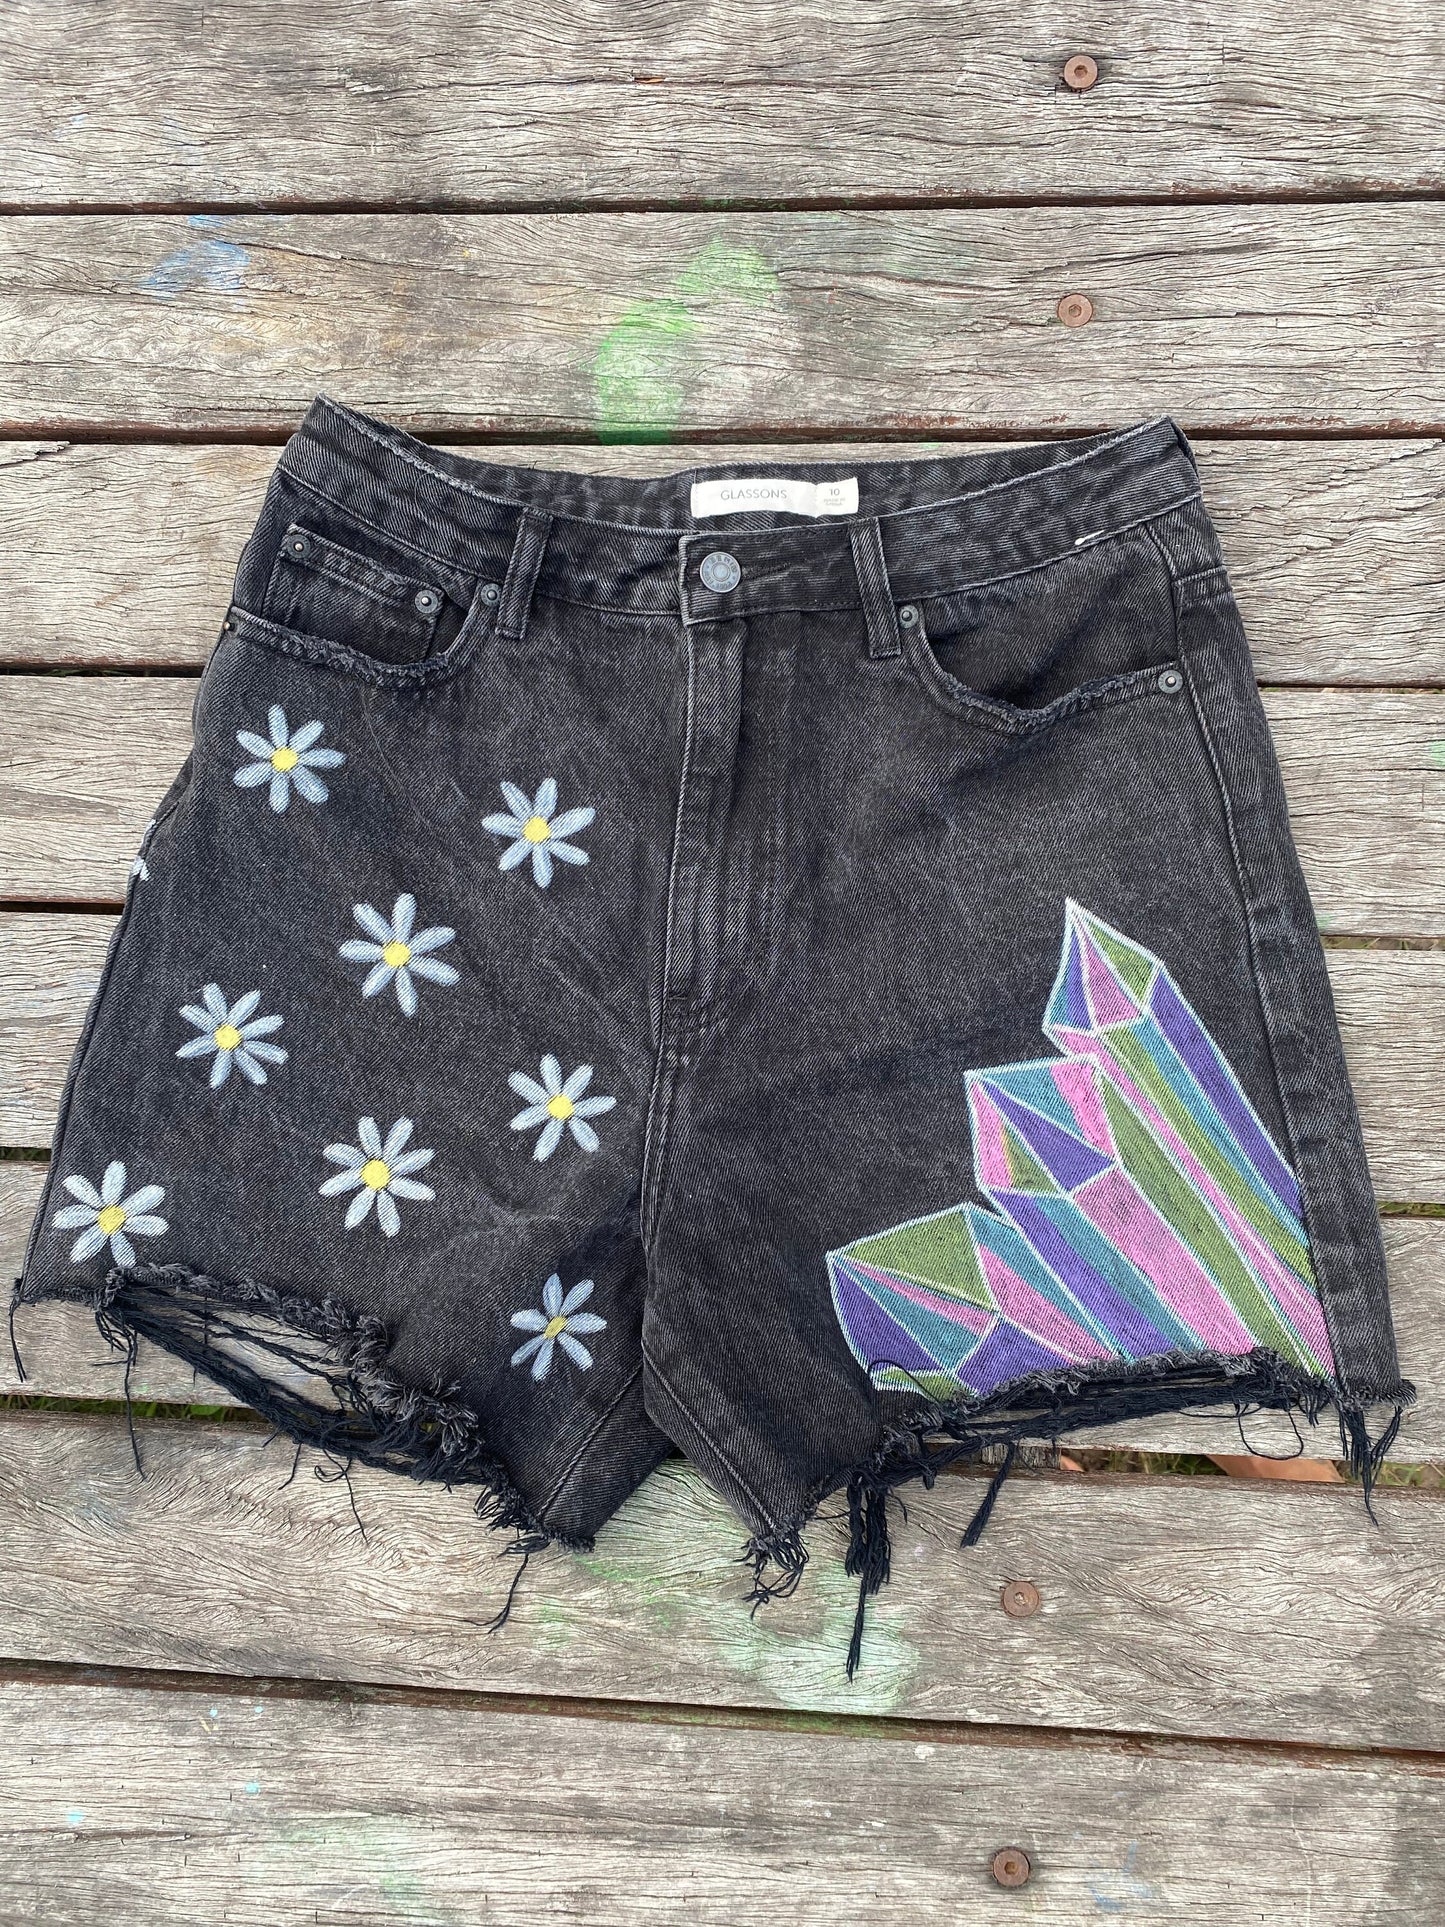 High waisted black denim shorts, flowers and crystals.